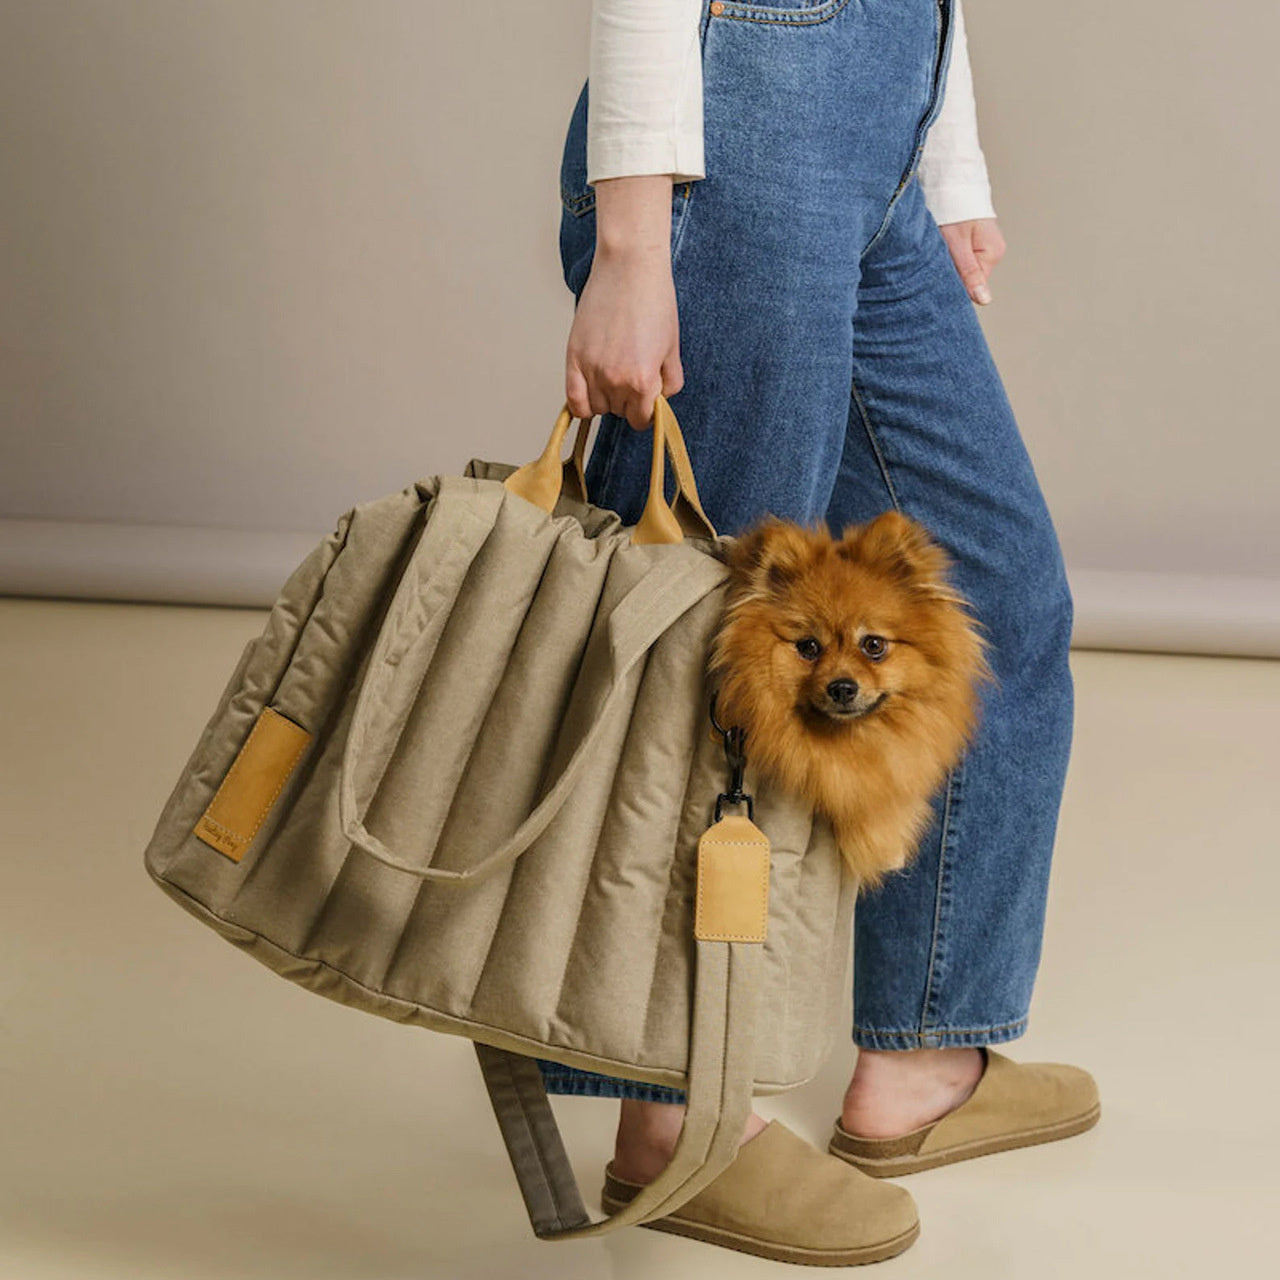 PawsAway Luxe Pet Travel Tote